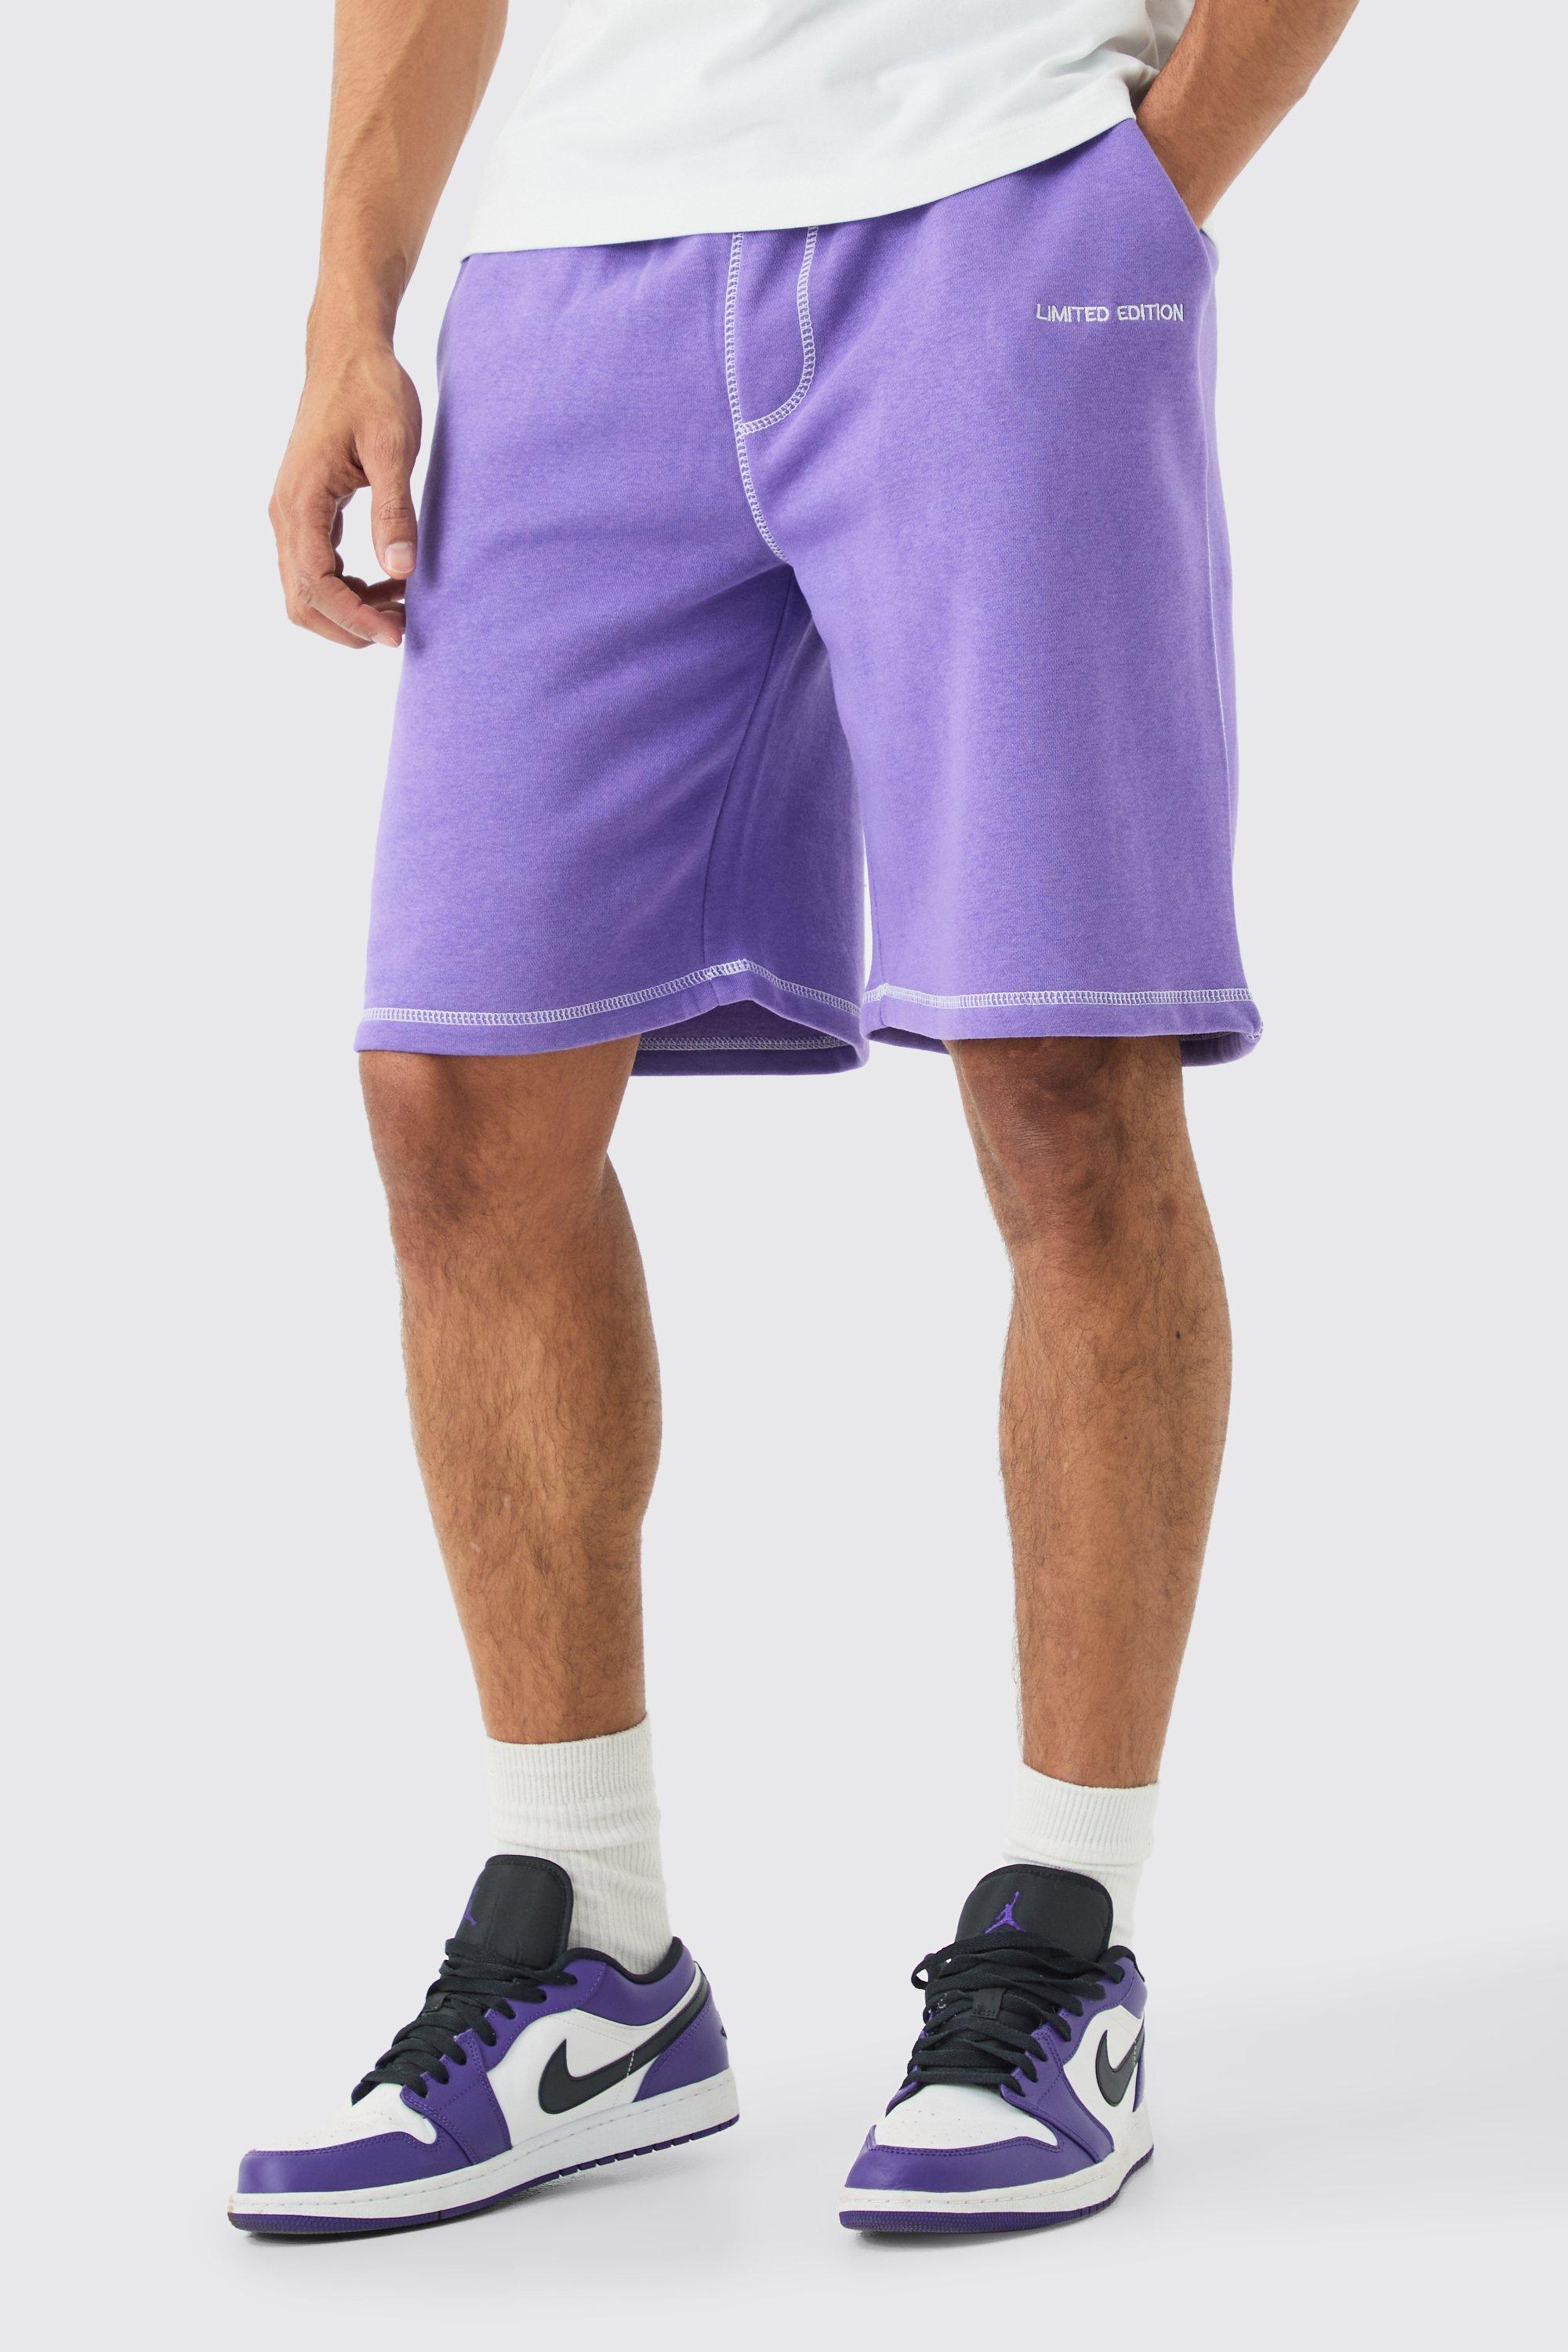 Image of Oversized Limited Edition Contrast Stitch Shorts, Purple